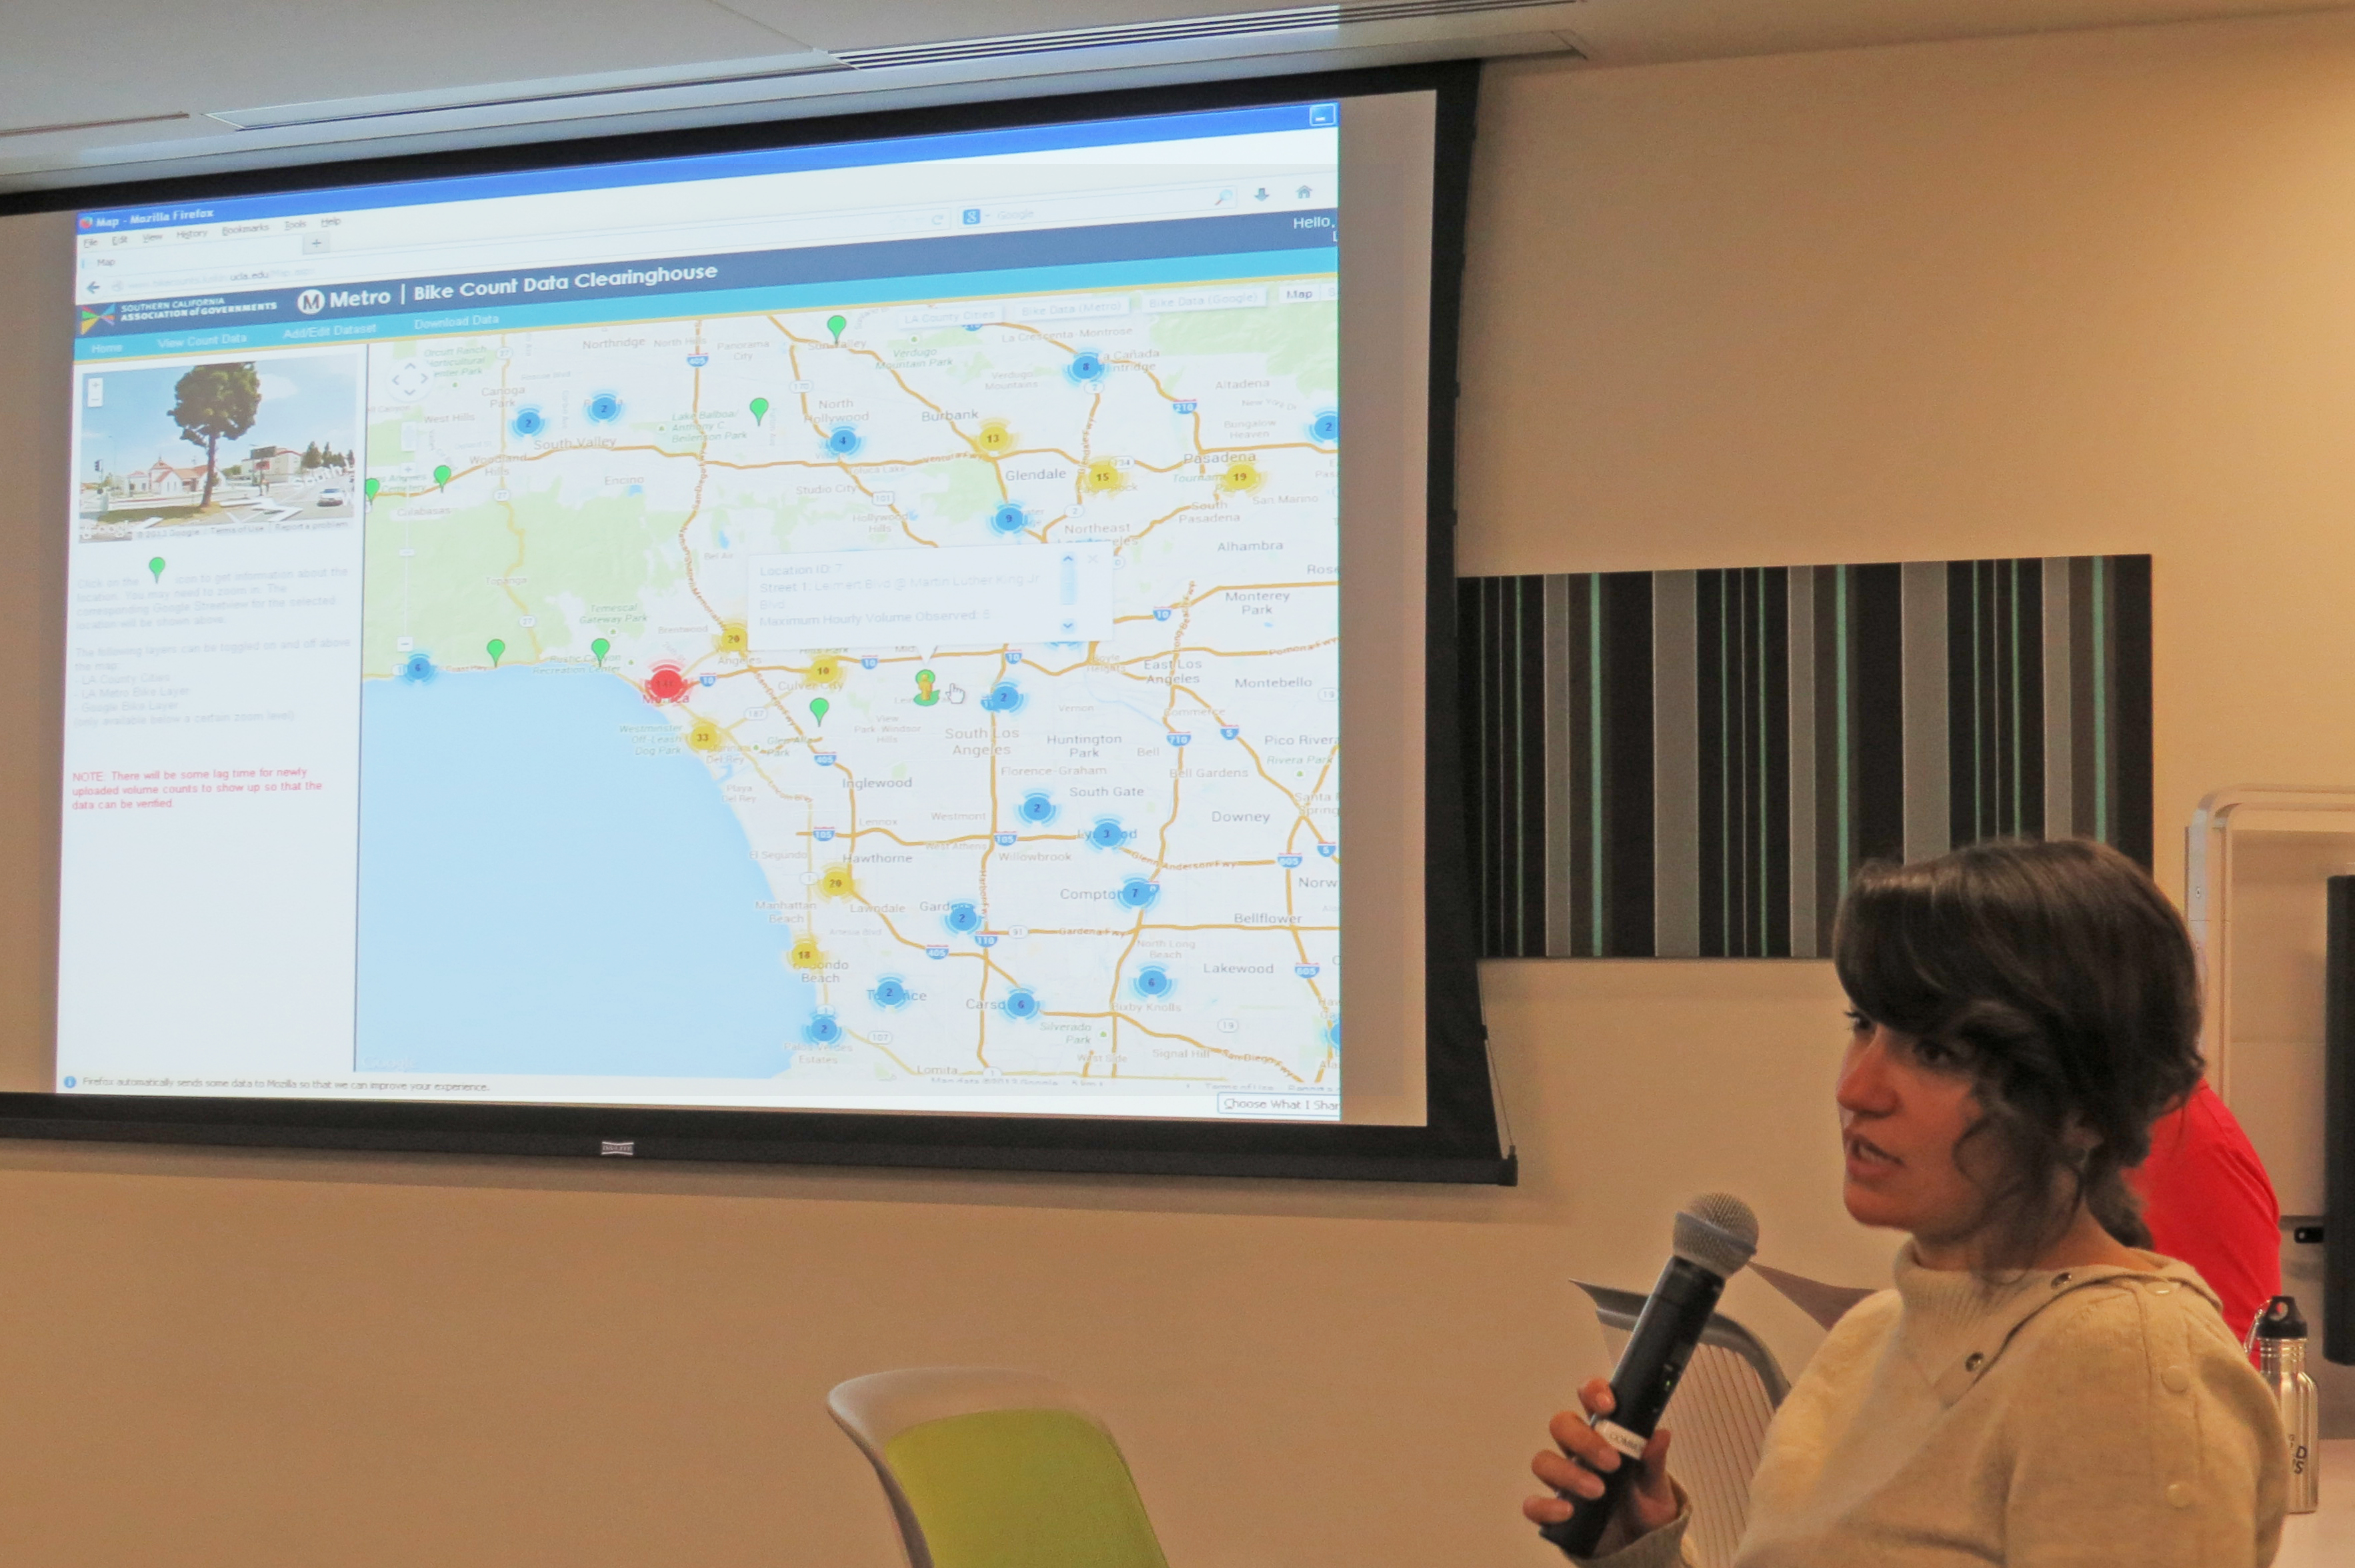 Complete Streets Initiative Manager Madeline Brozen Participates in UCLA’s GIS Day 2013 Program